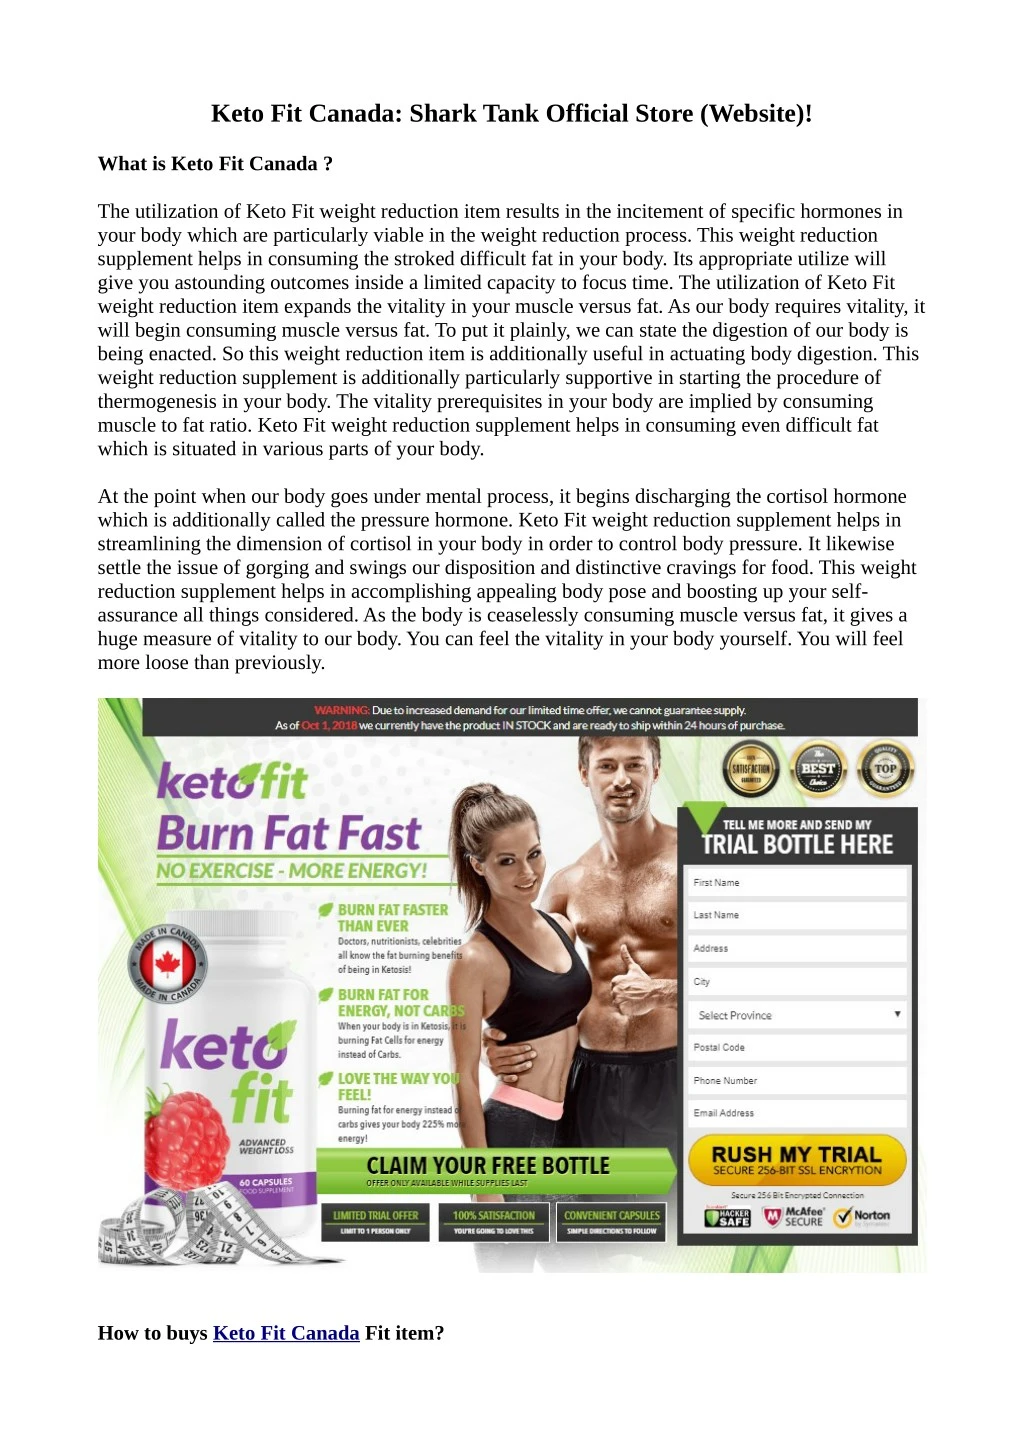 keto fit canada shark tank official store website